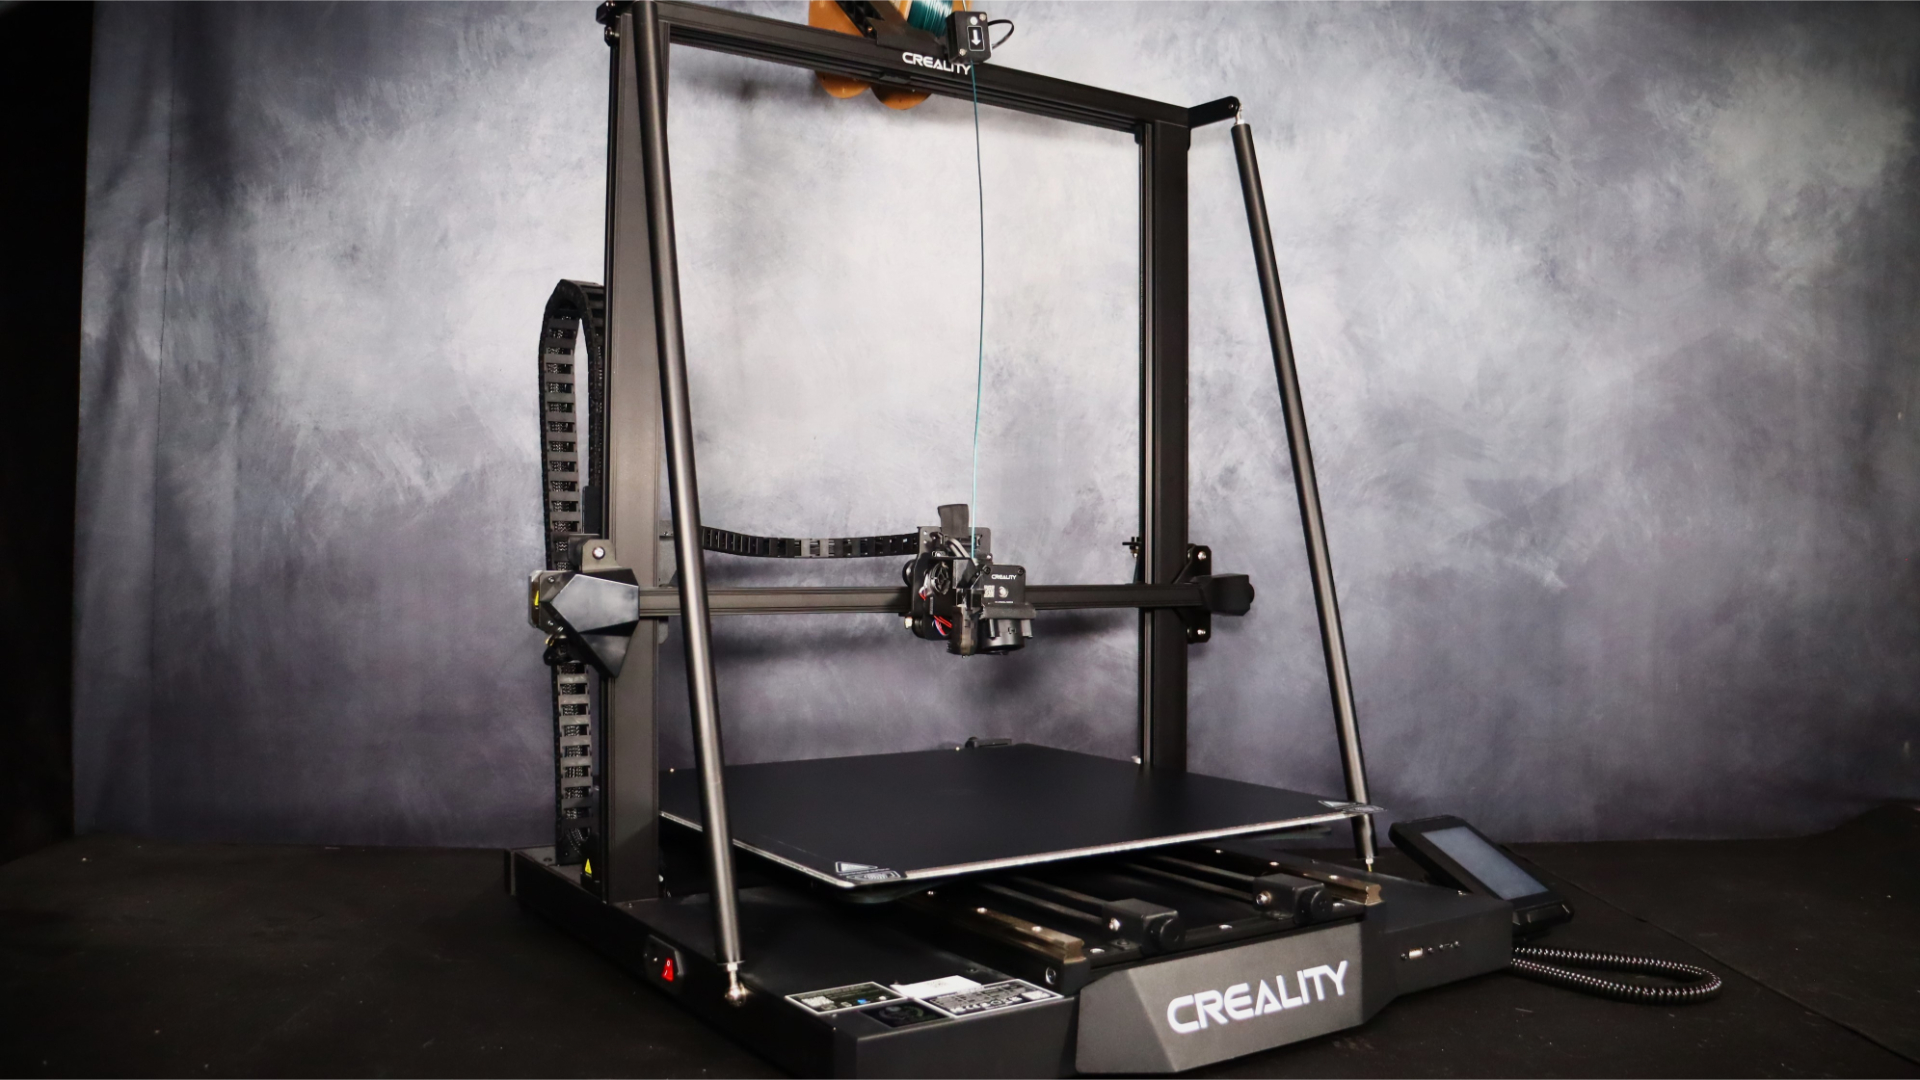 Creality CR-M4 review: Industrial size, quality, and price